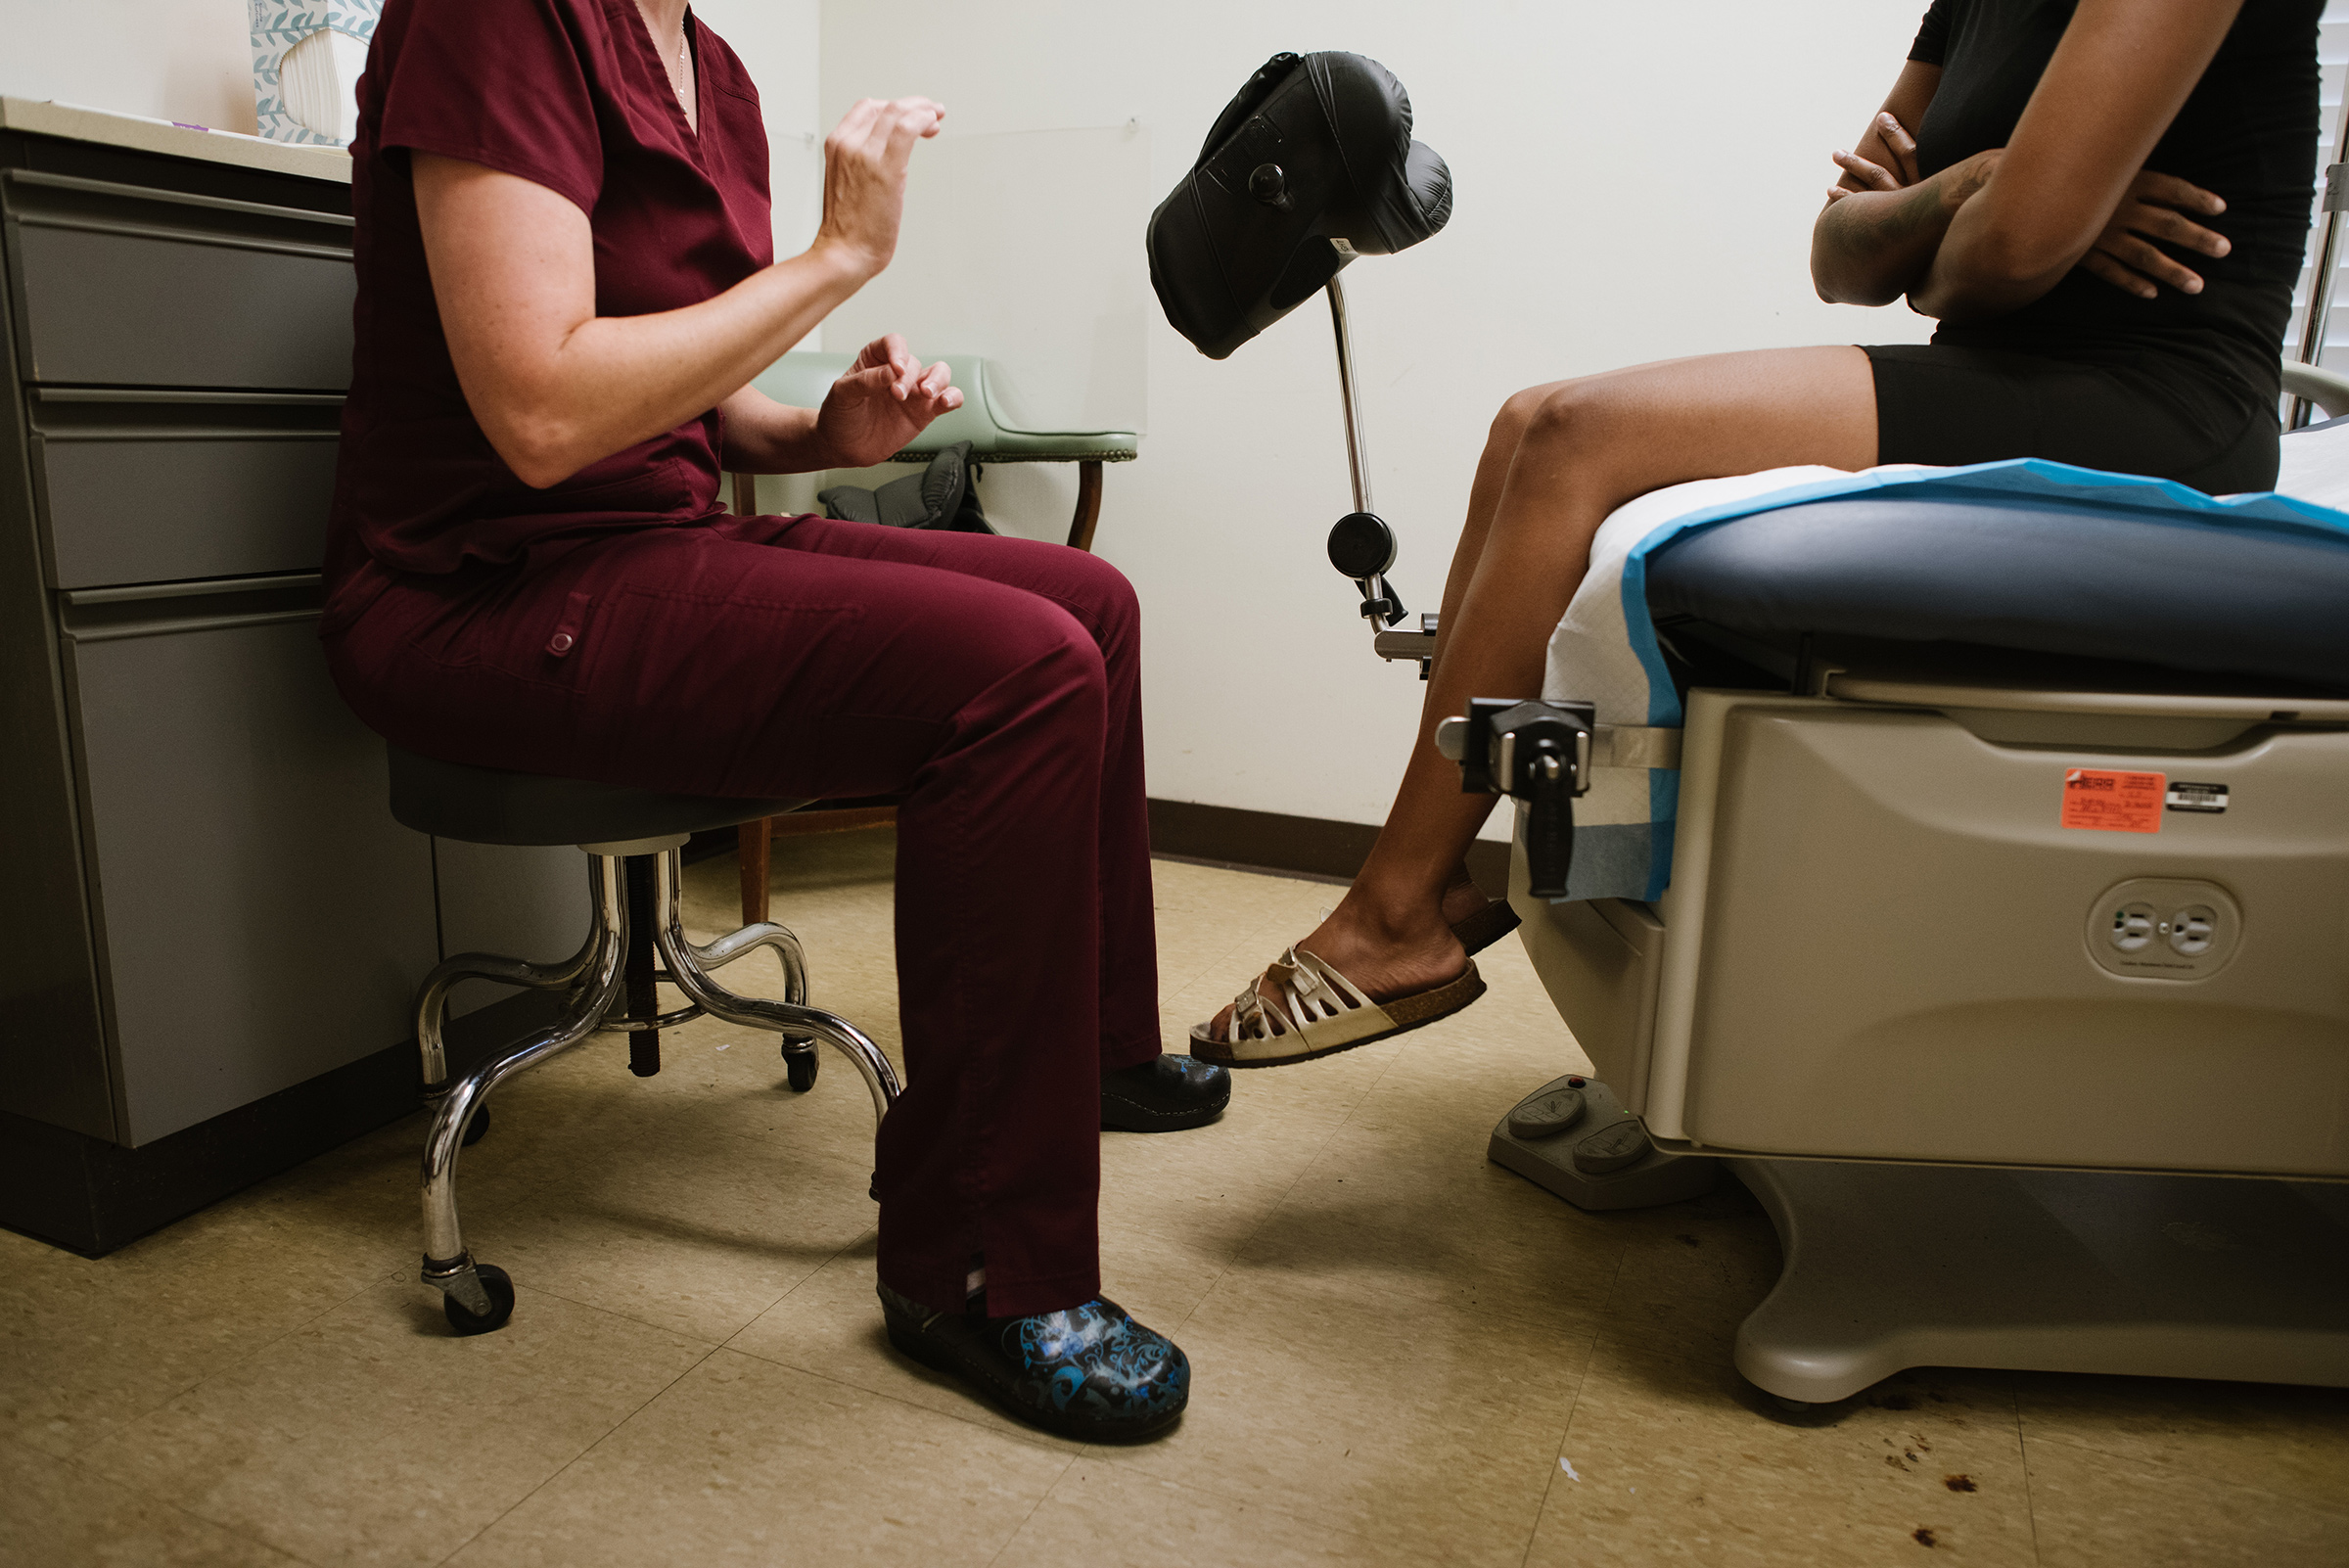 Dr. Leah Torres meets with a patient receiving an IUD on July 21. (Lucy Garrett for TIME)